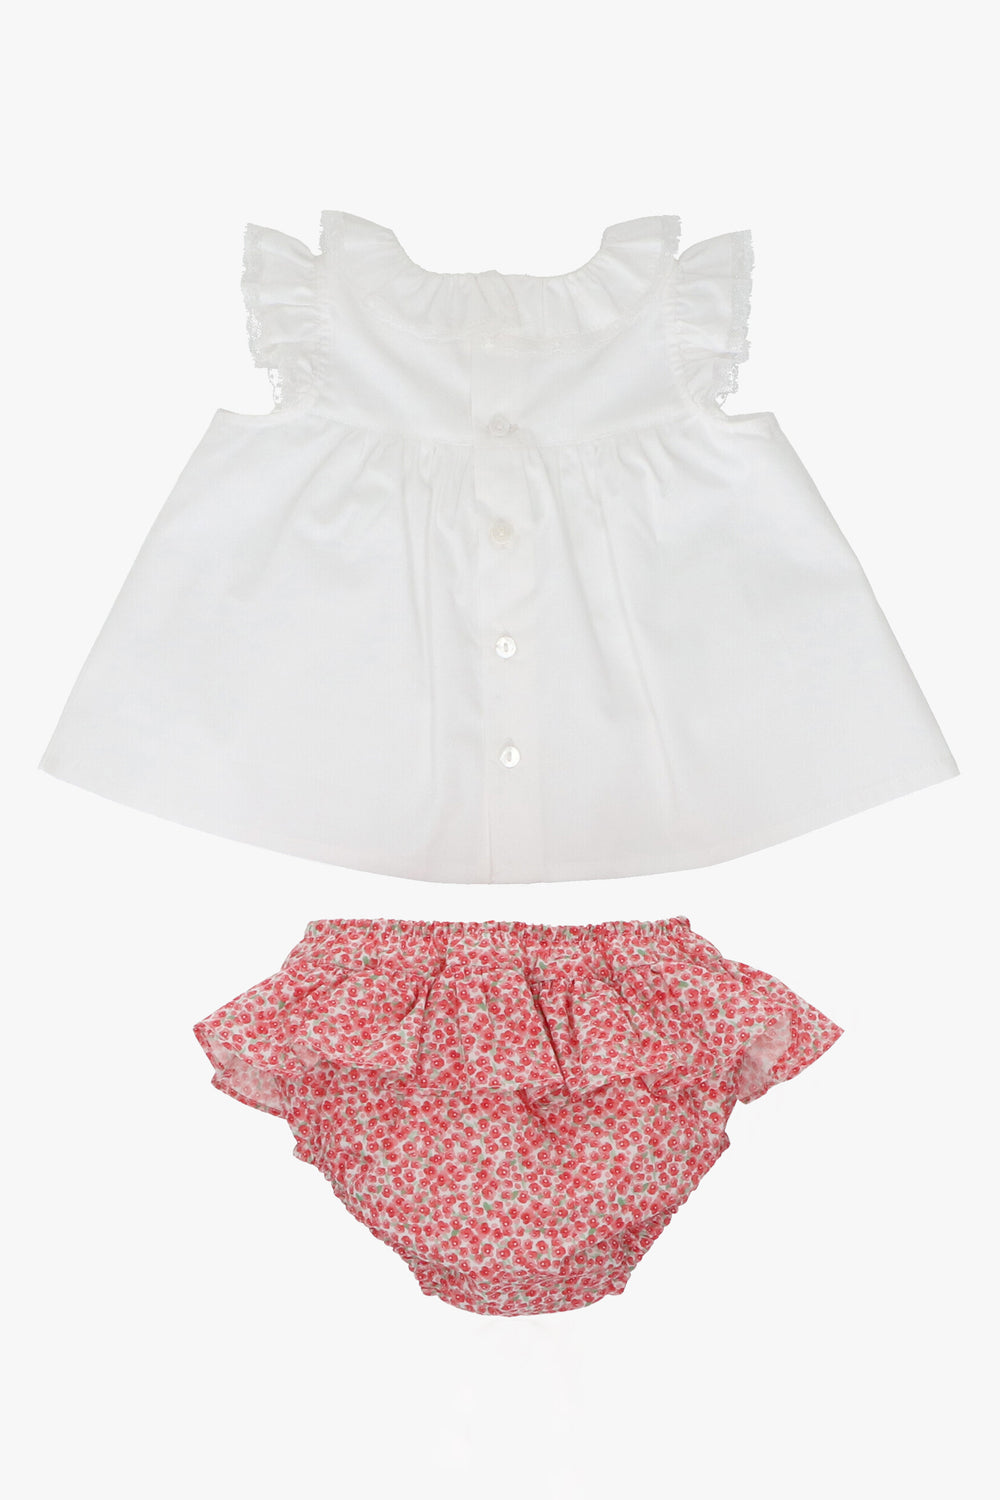 Martín Aranda "Emmeline" Blouse & Red Floral Bloomers | iphoneandroidapplications